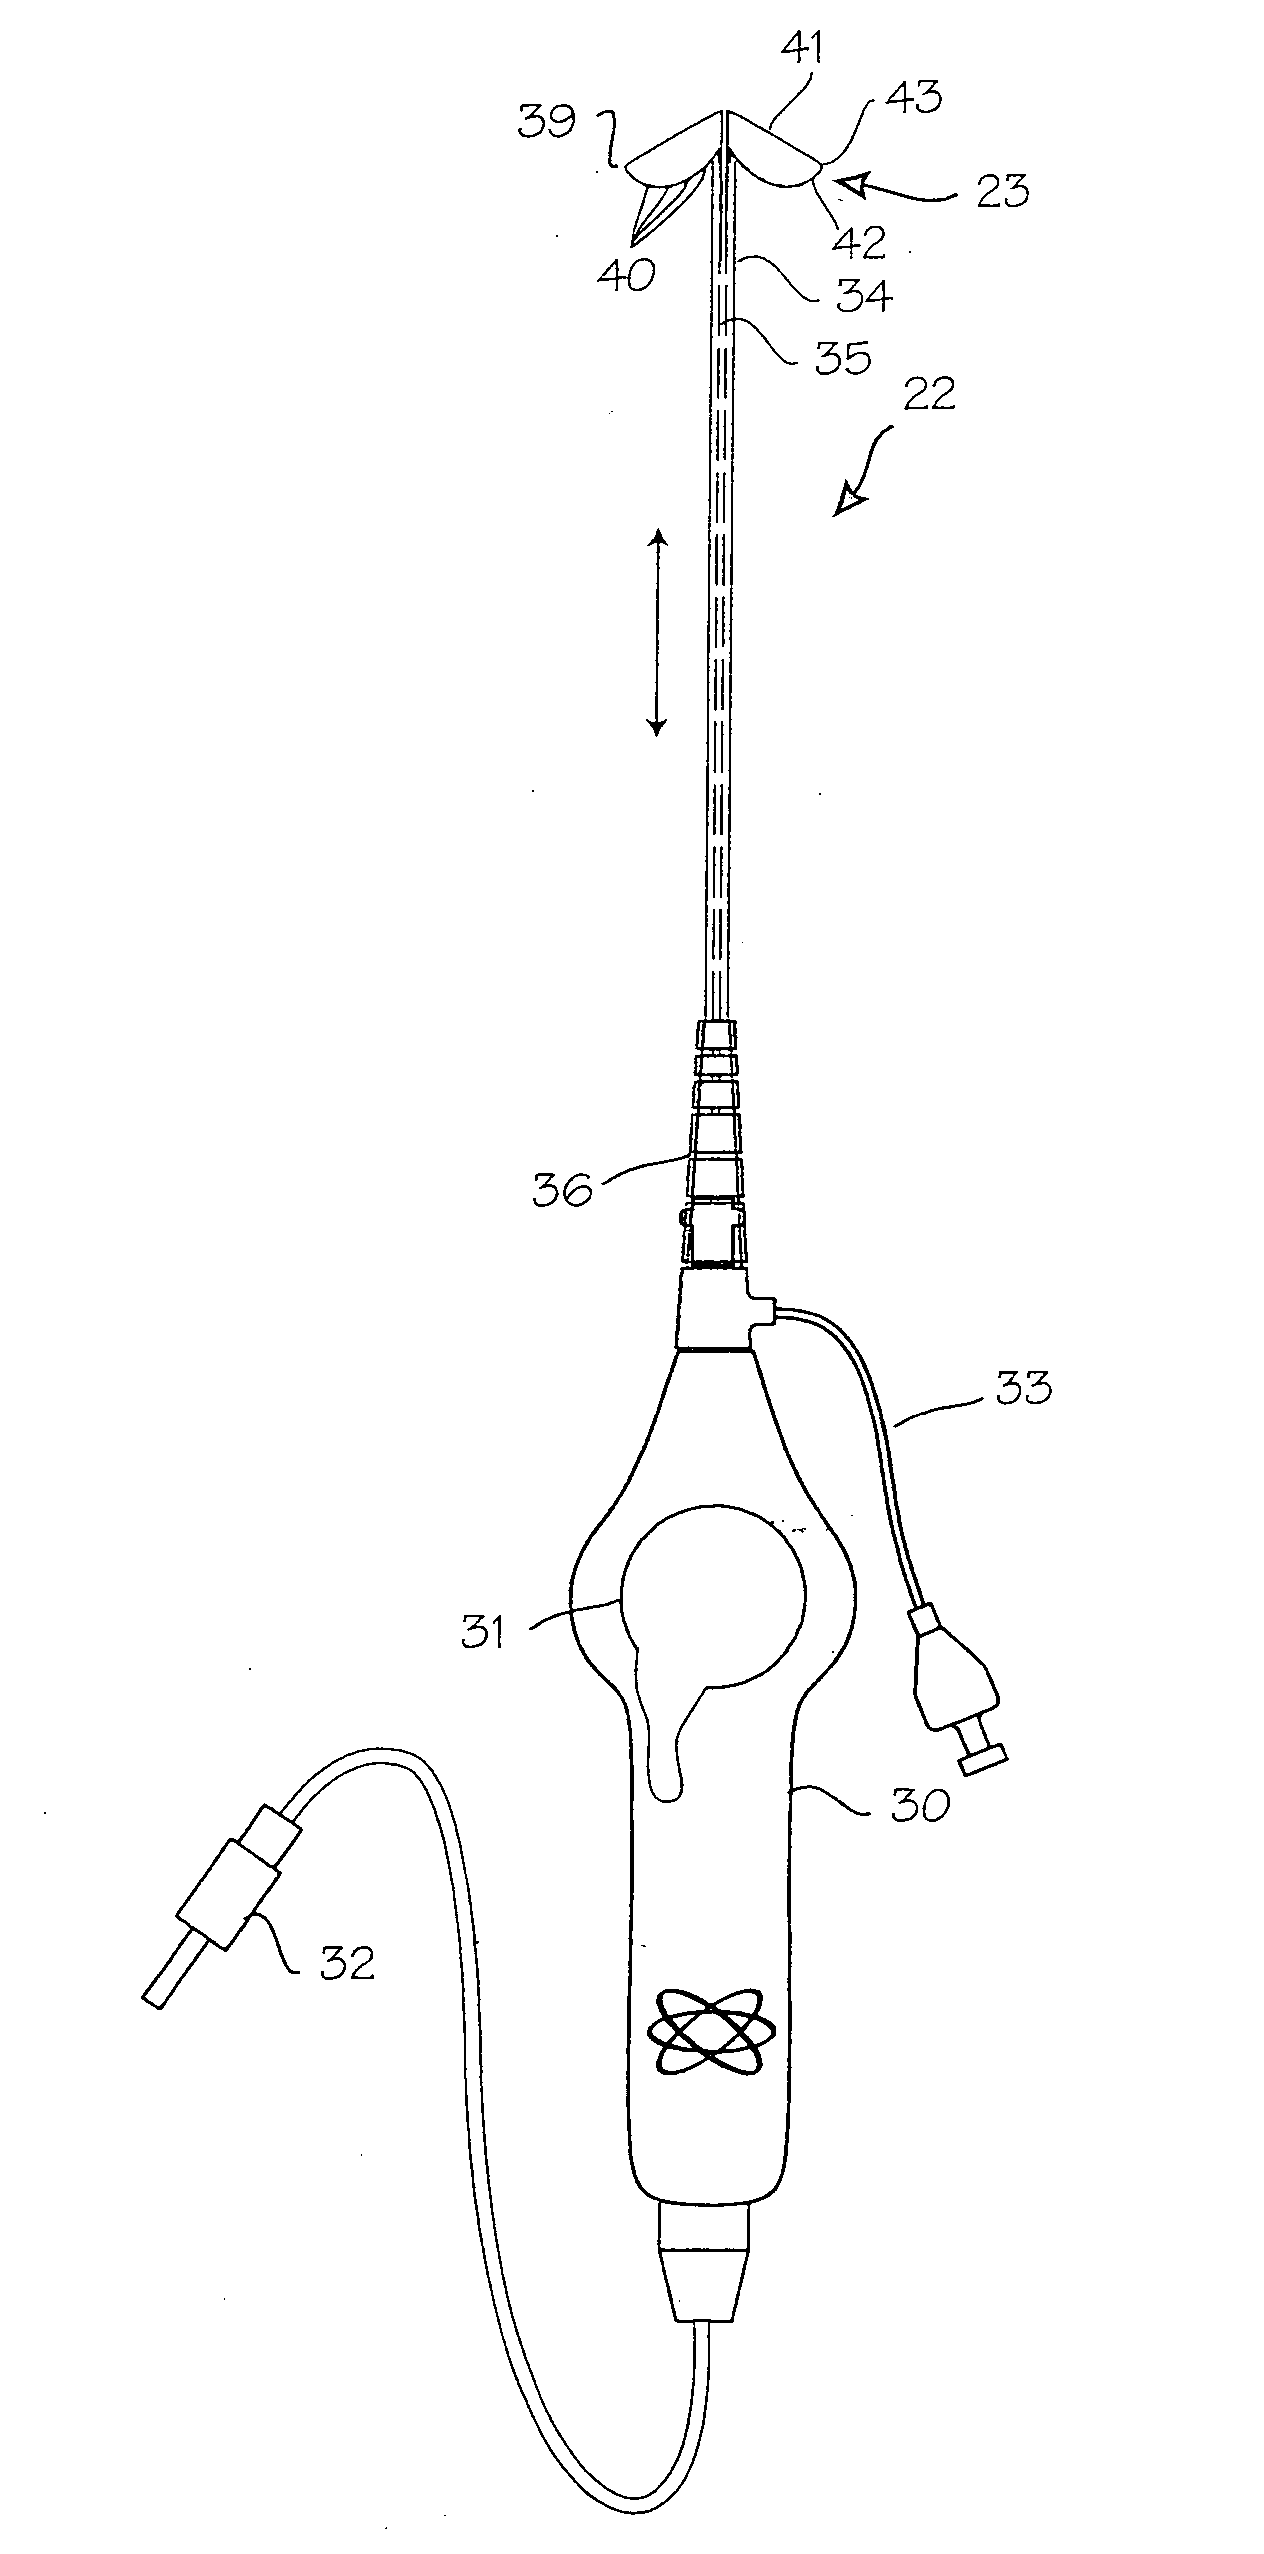 Atrial ablation catheter adapted for treatment of septal wall arrhythmogenic foci and method of use